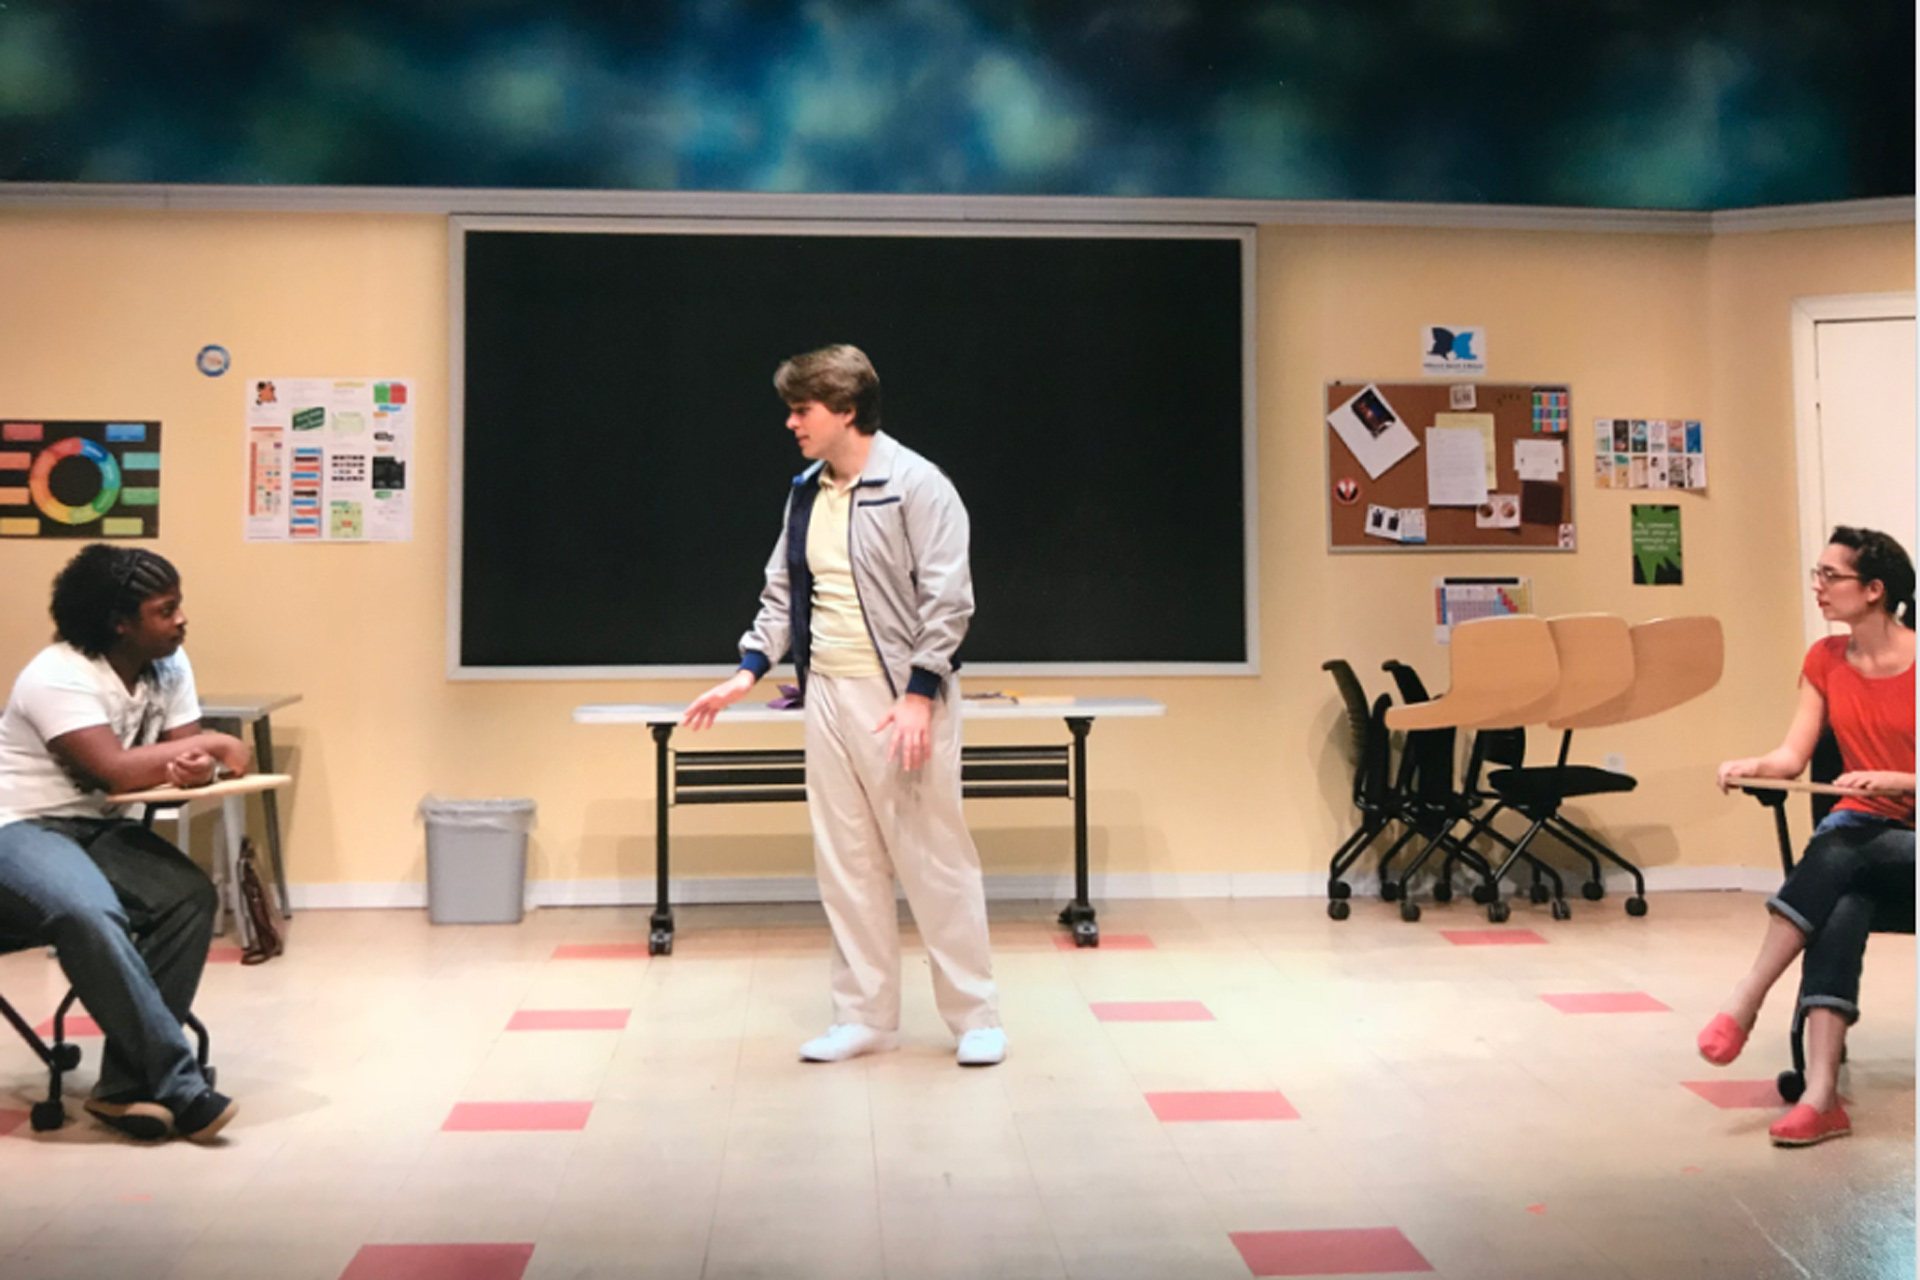 Male actor stands in front of a chalkboard speaking to students